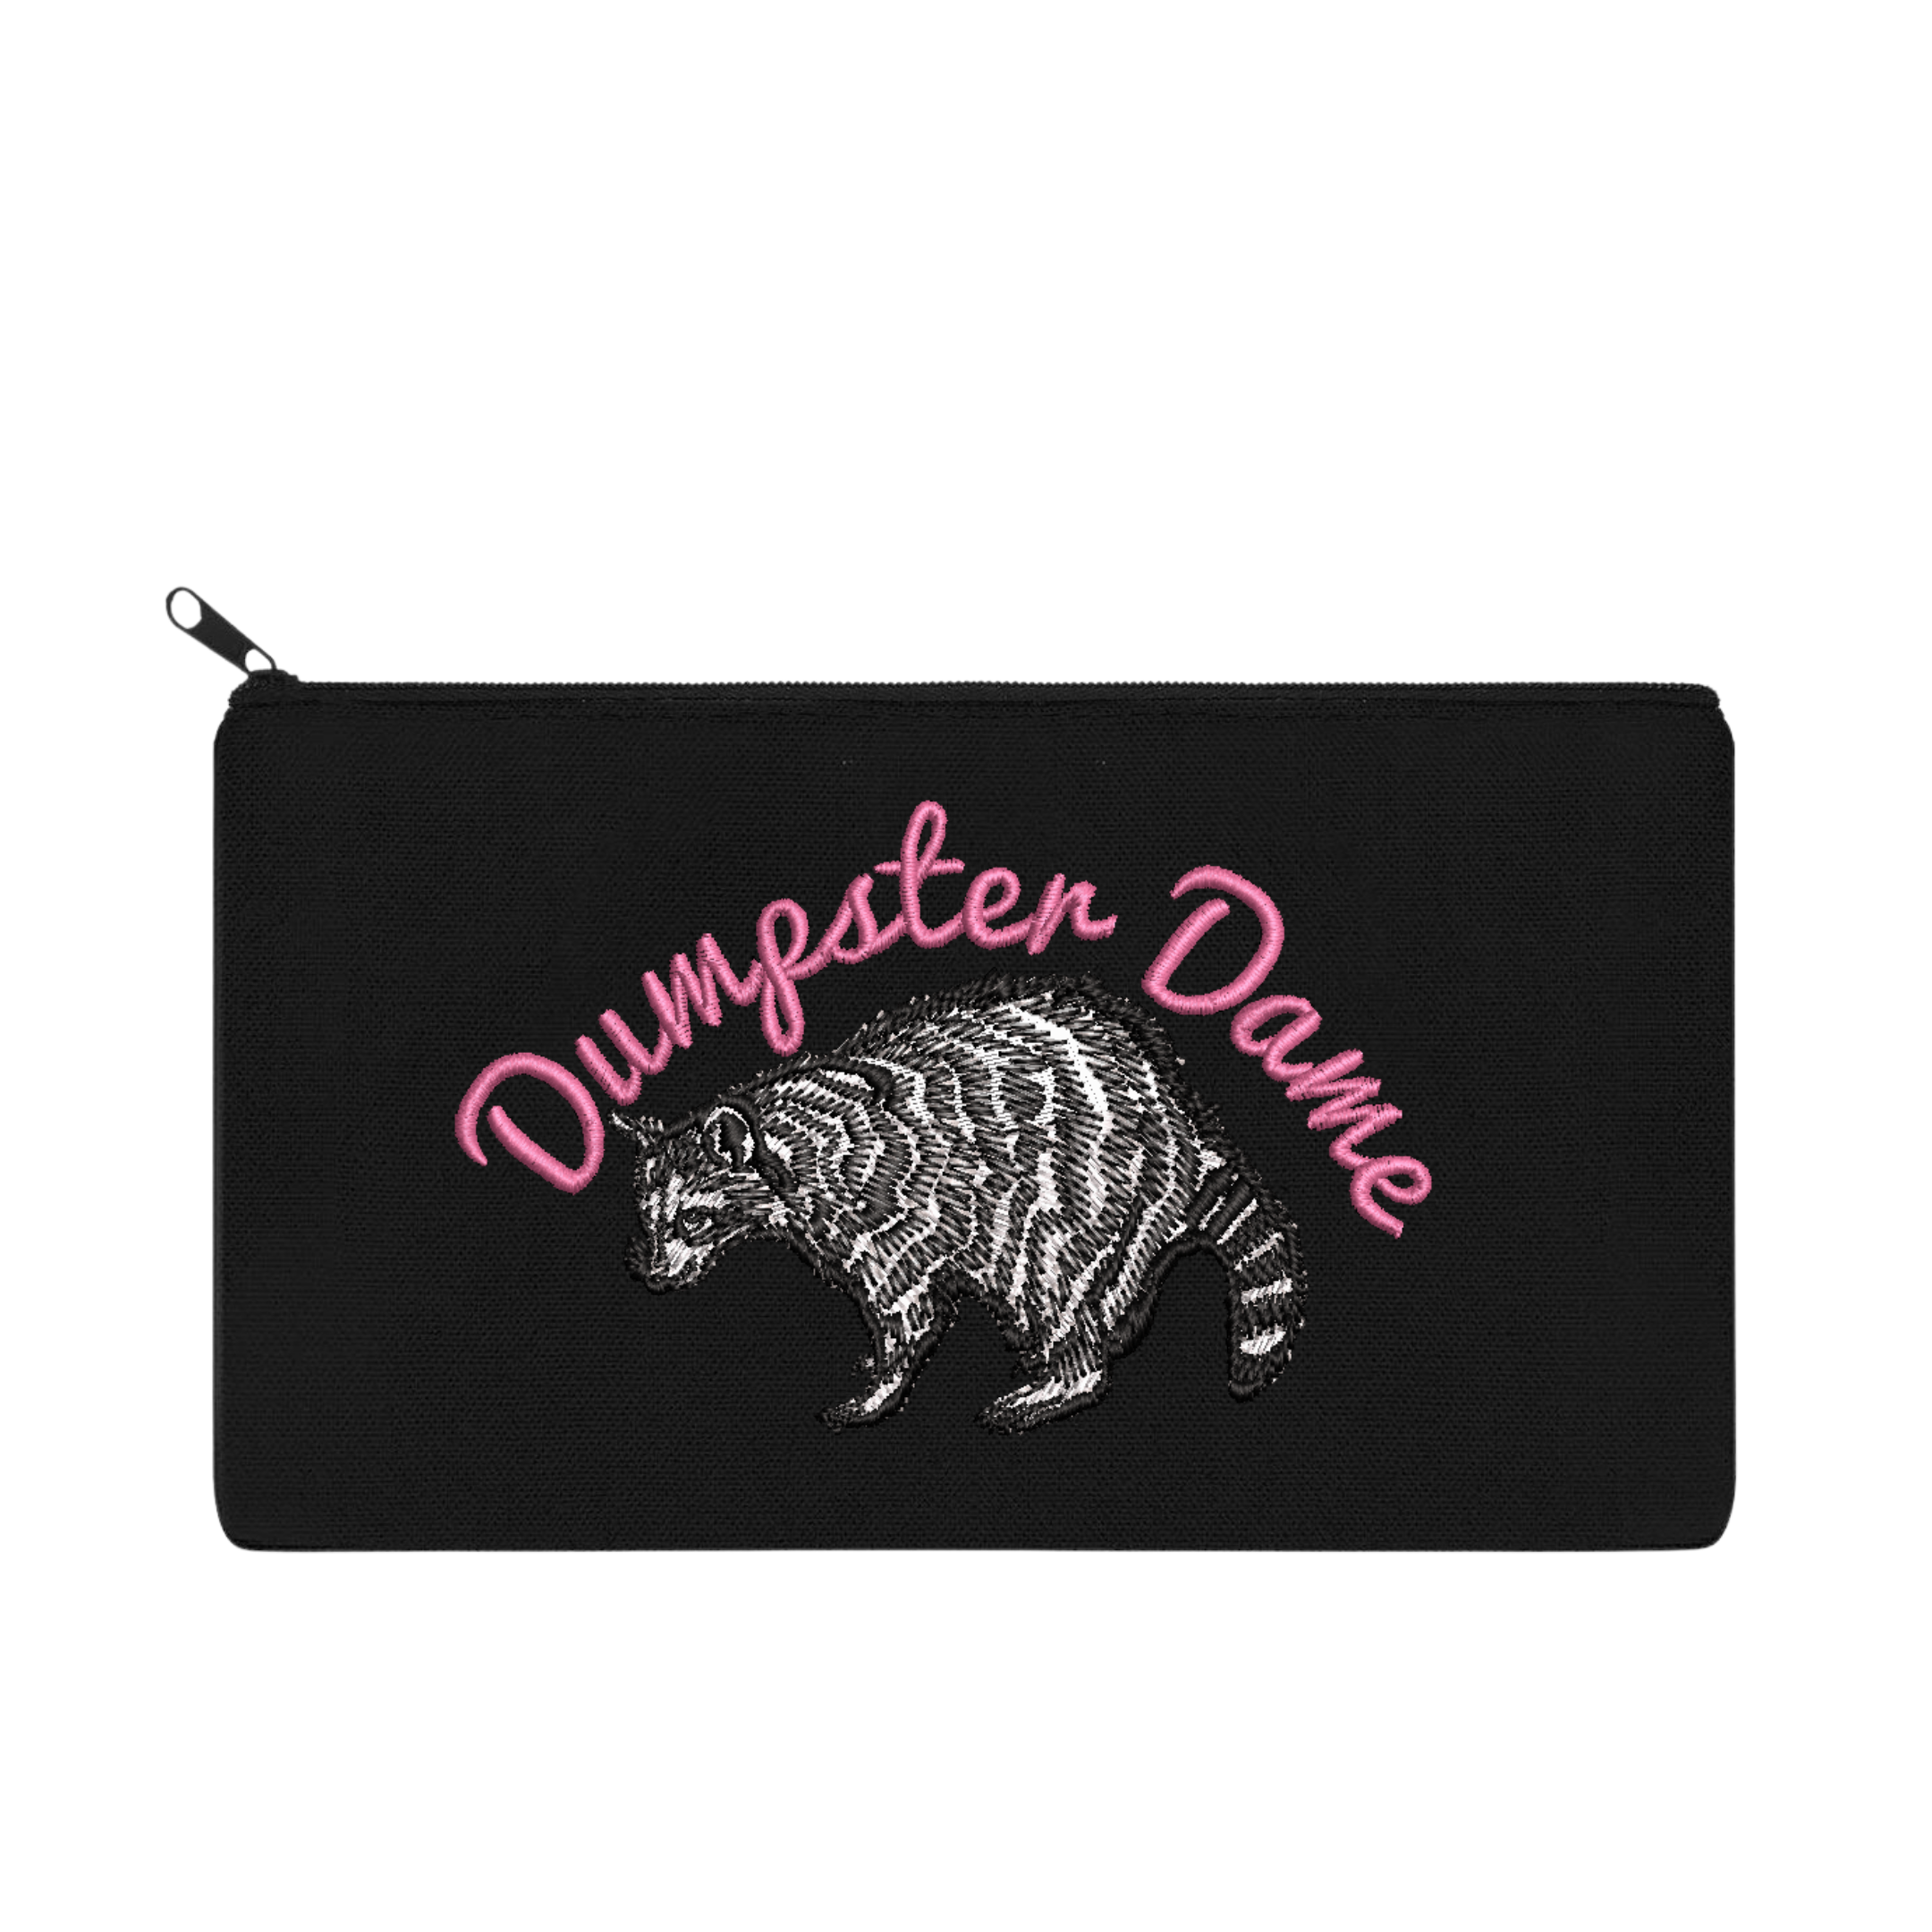 Dumpster Dame Embroidered Multipurpose Zipper Pouch Bag